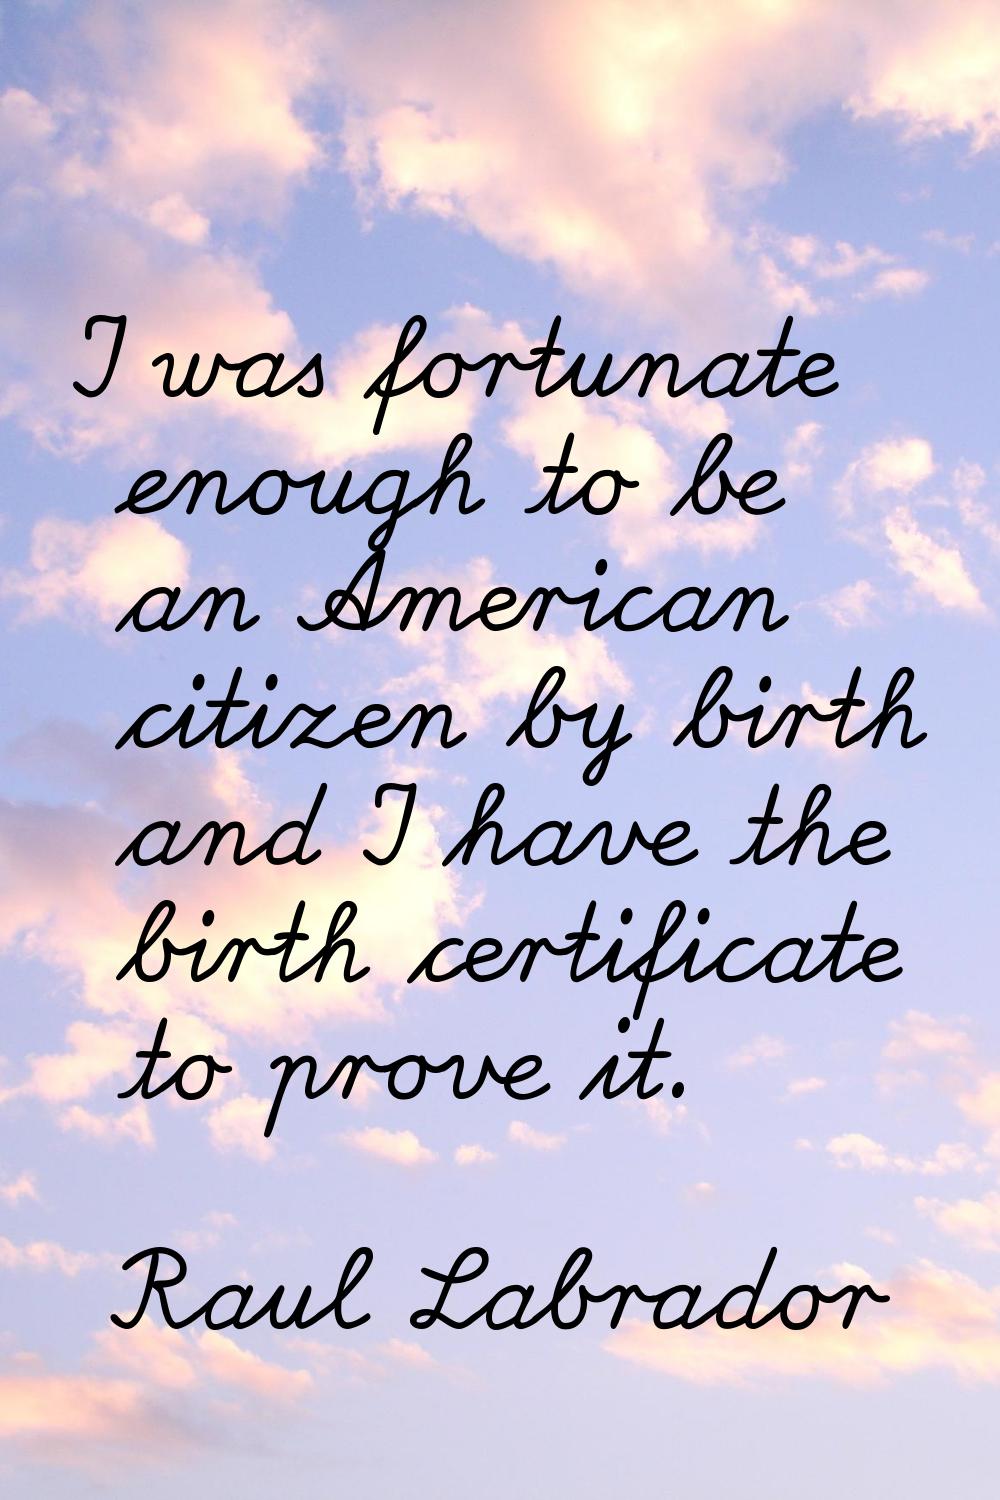 I was fortunate enough to be an American citizen by birth and I have the birth certificate to prove